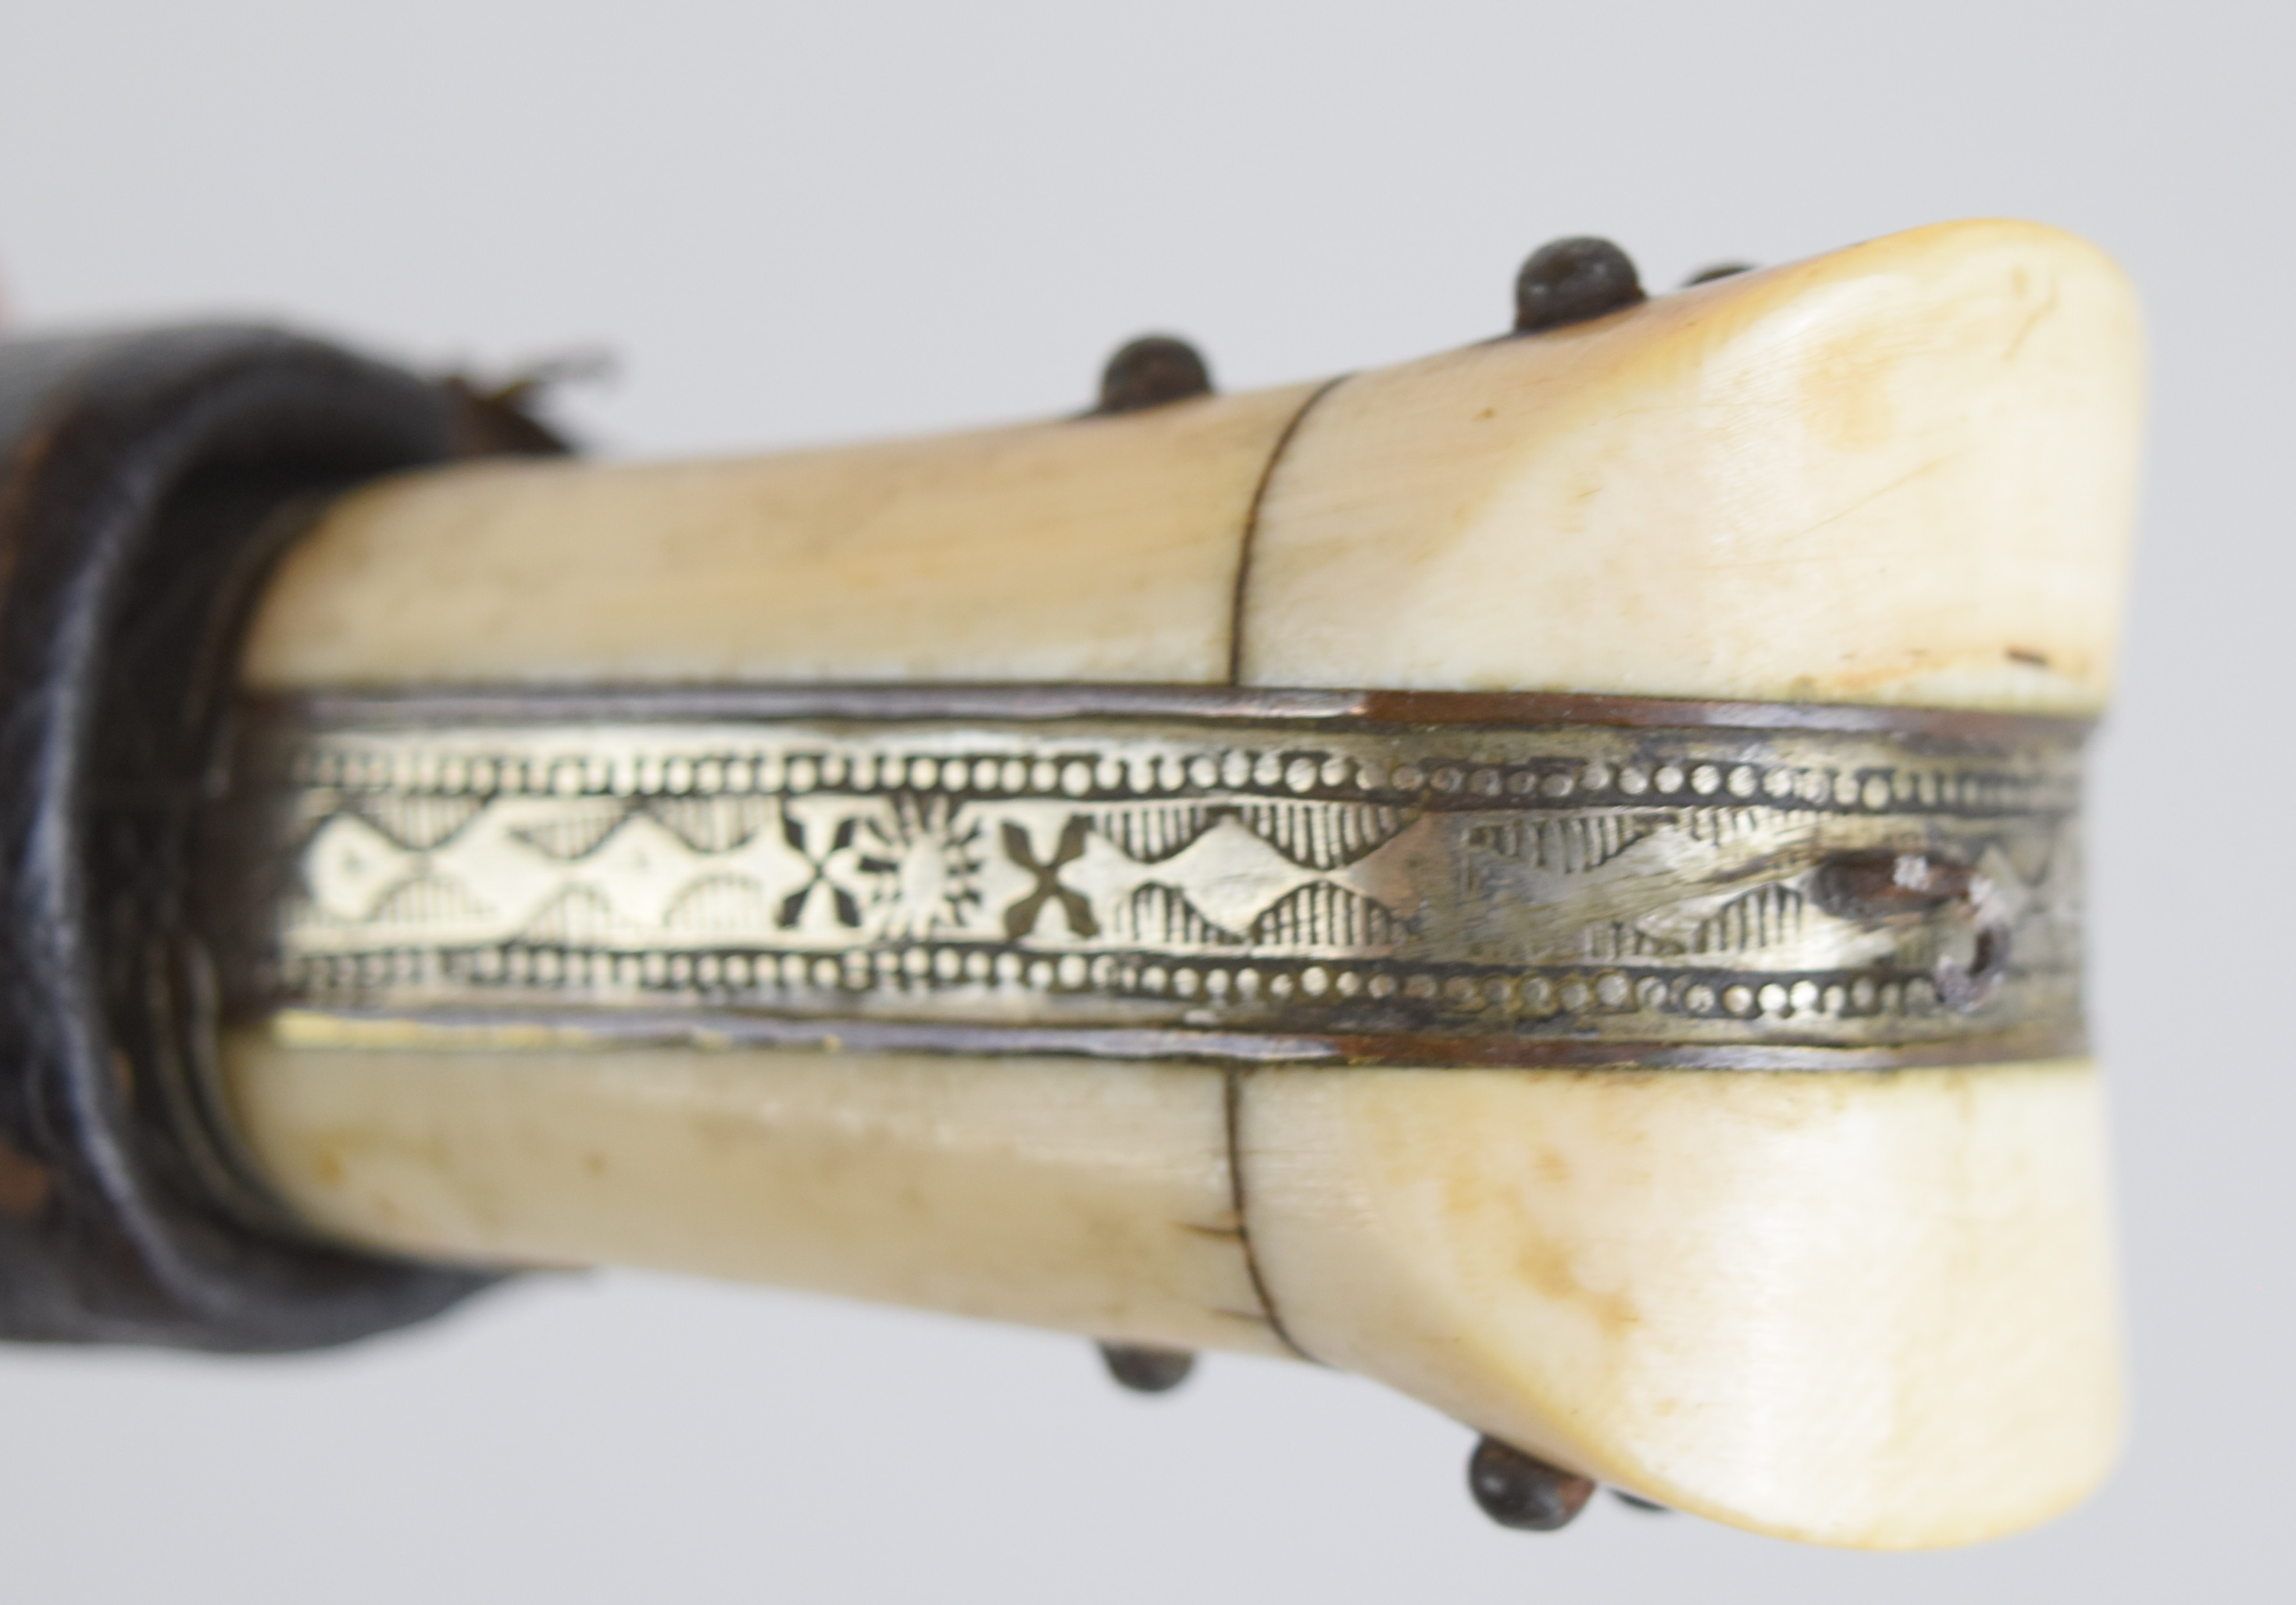 Indo Persian Pesh-Kabz knife or dagger with ivory grips to the curved handle, engraved decoration - Image 4 of 8